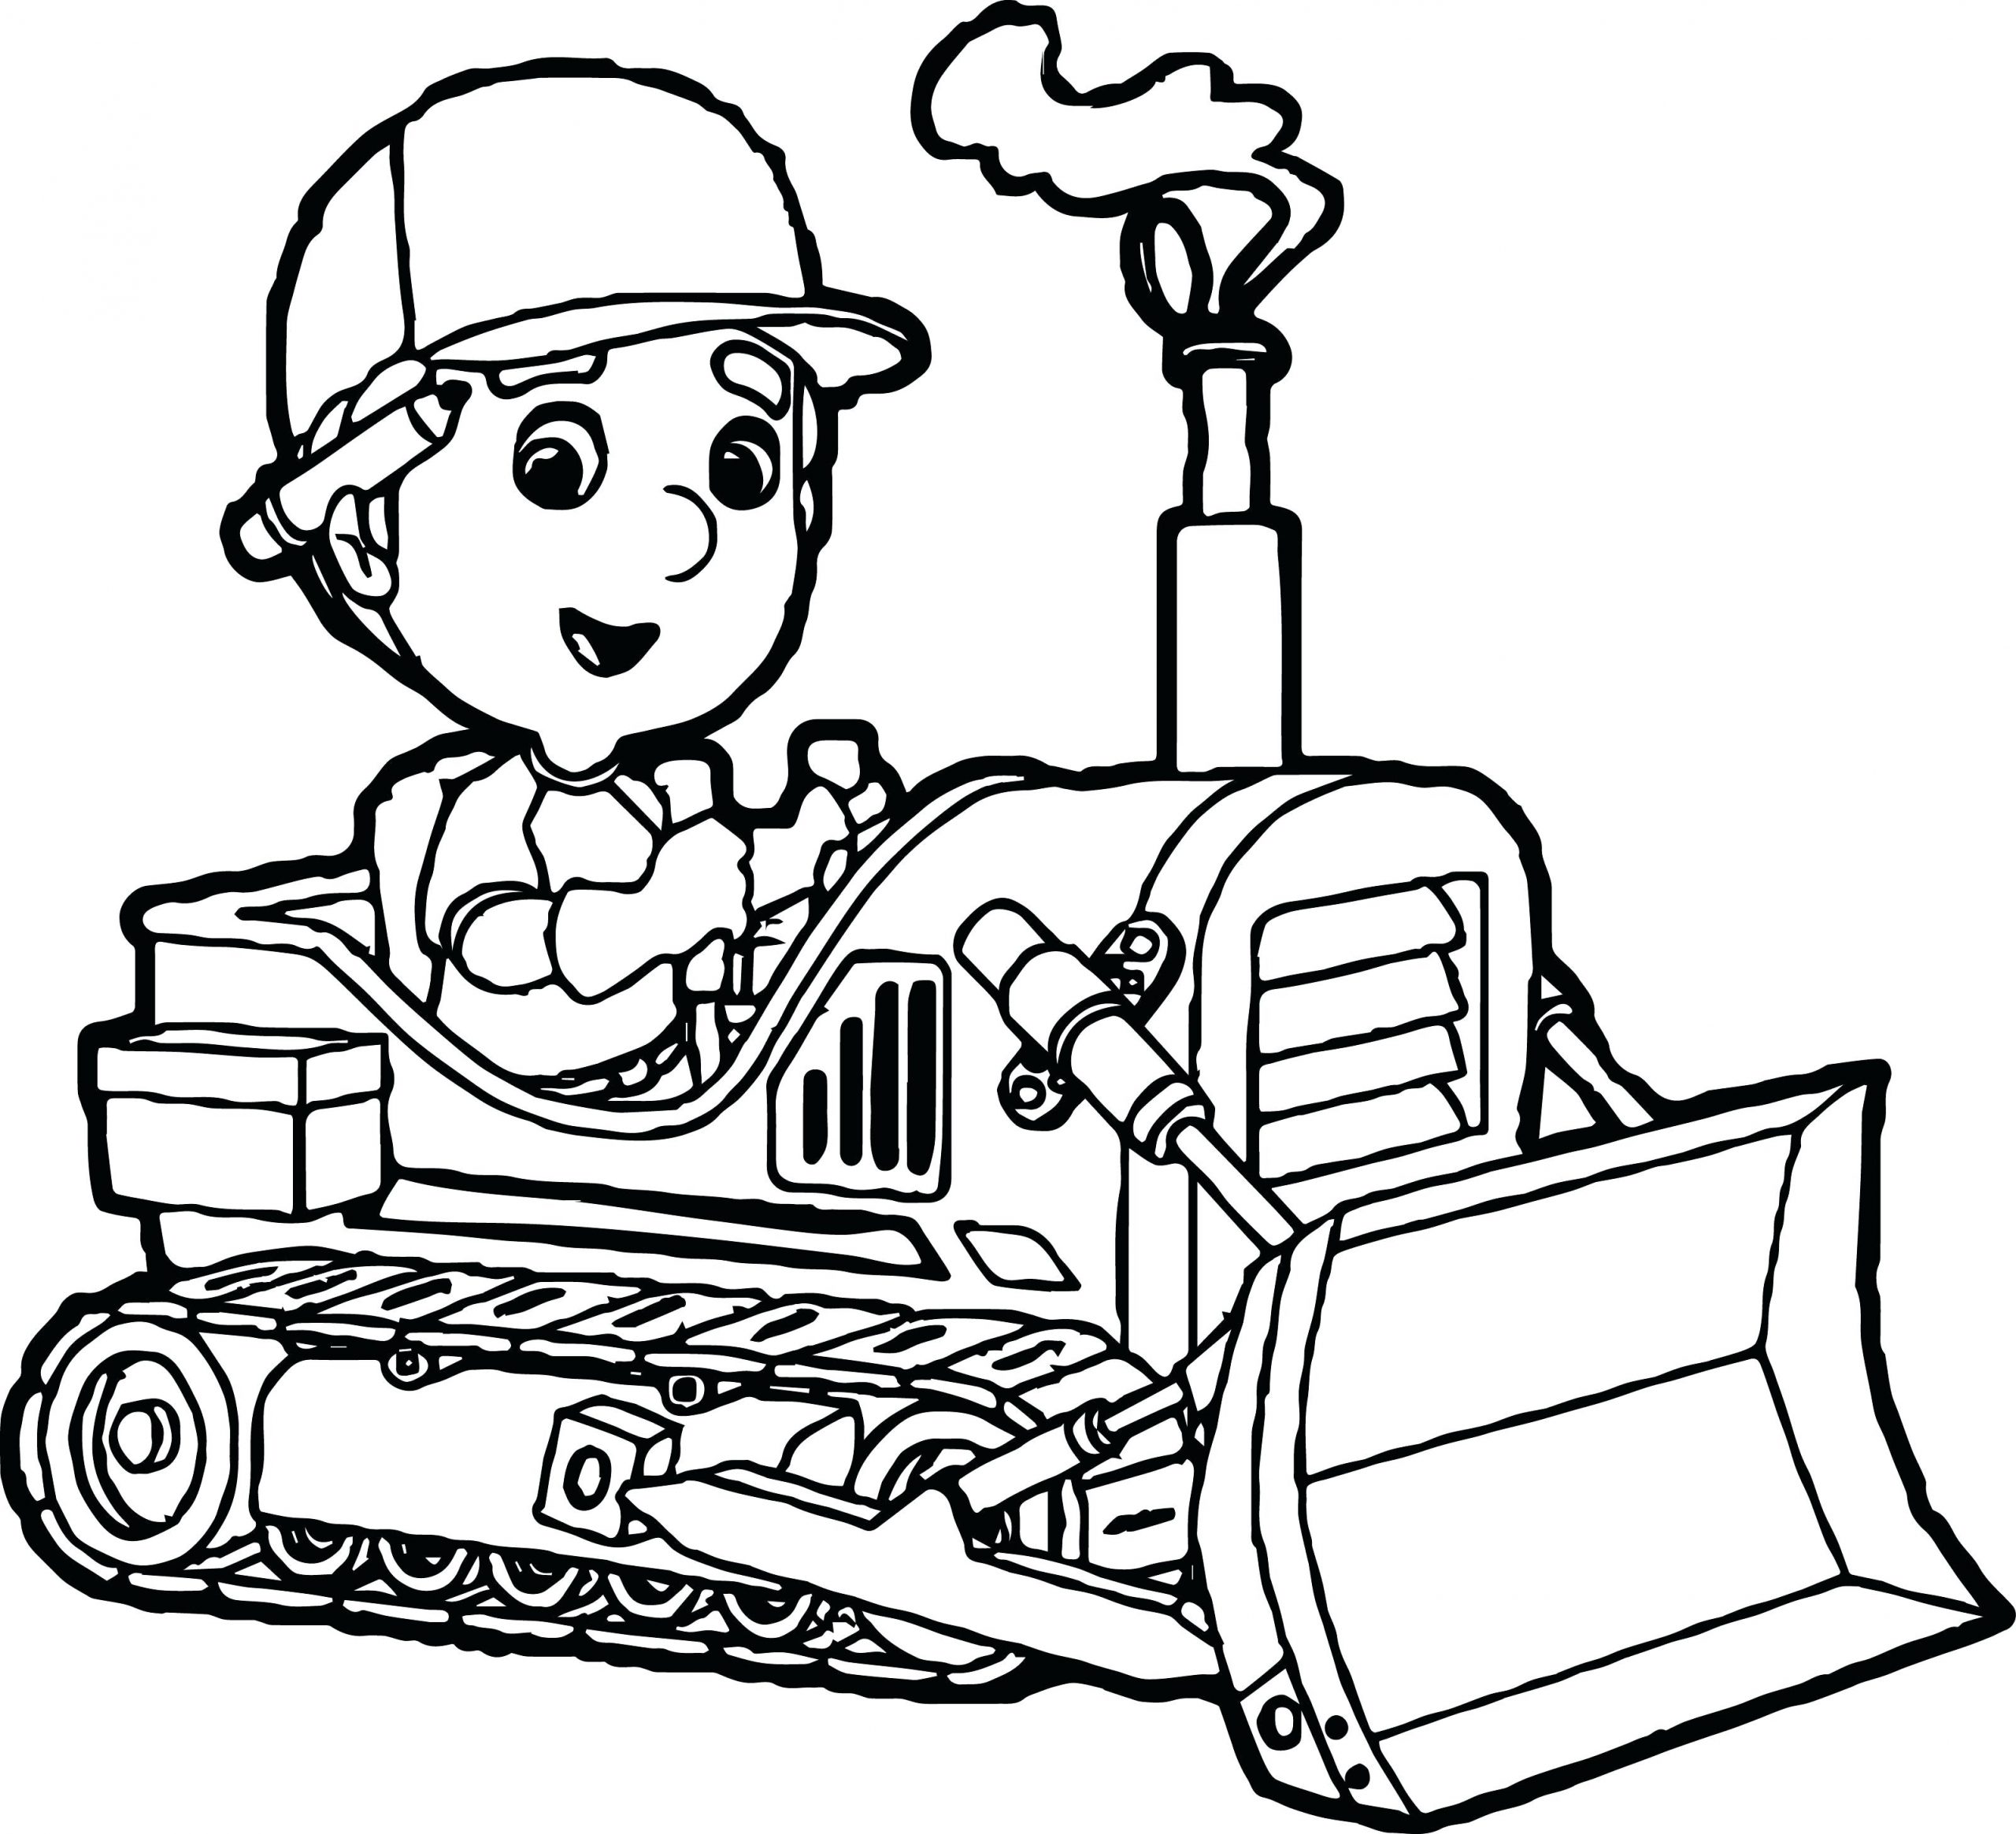  Backhoe Coloring Page for Adult